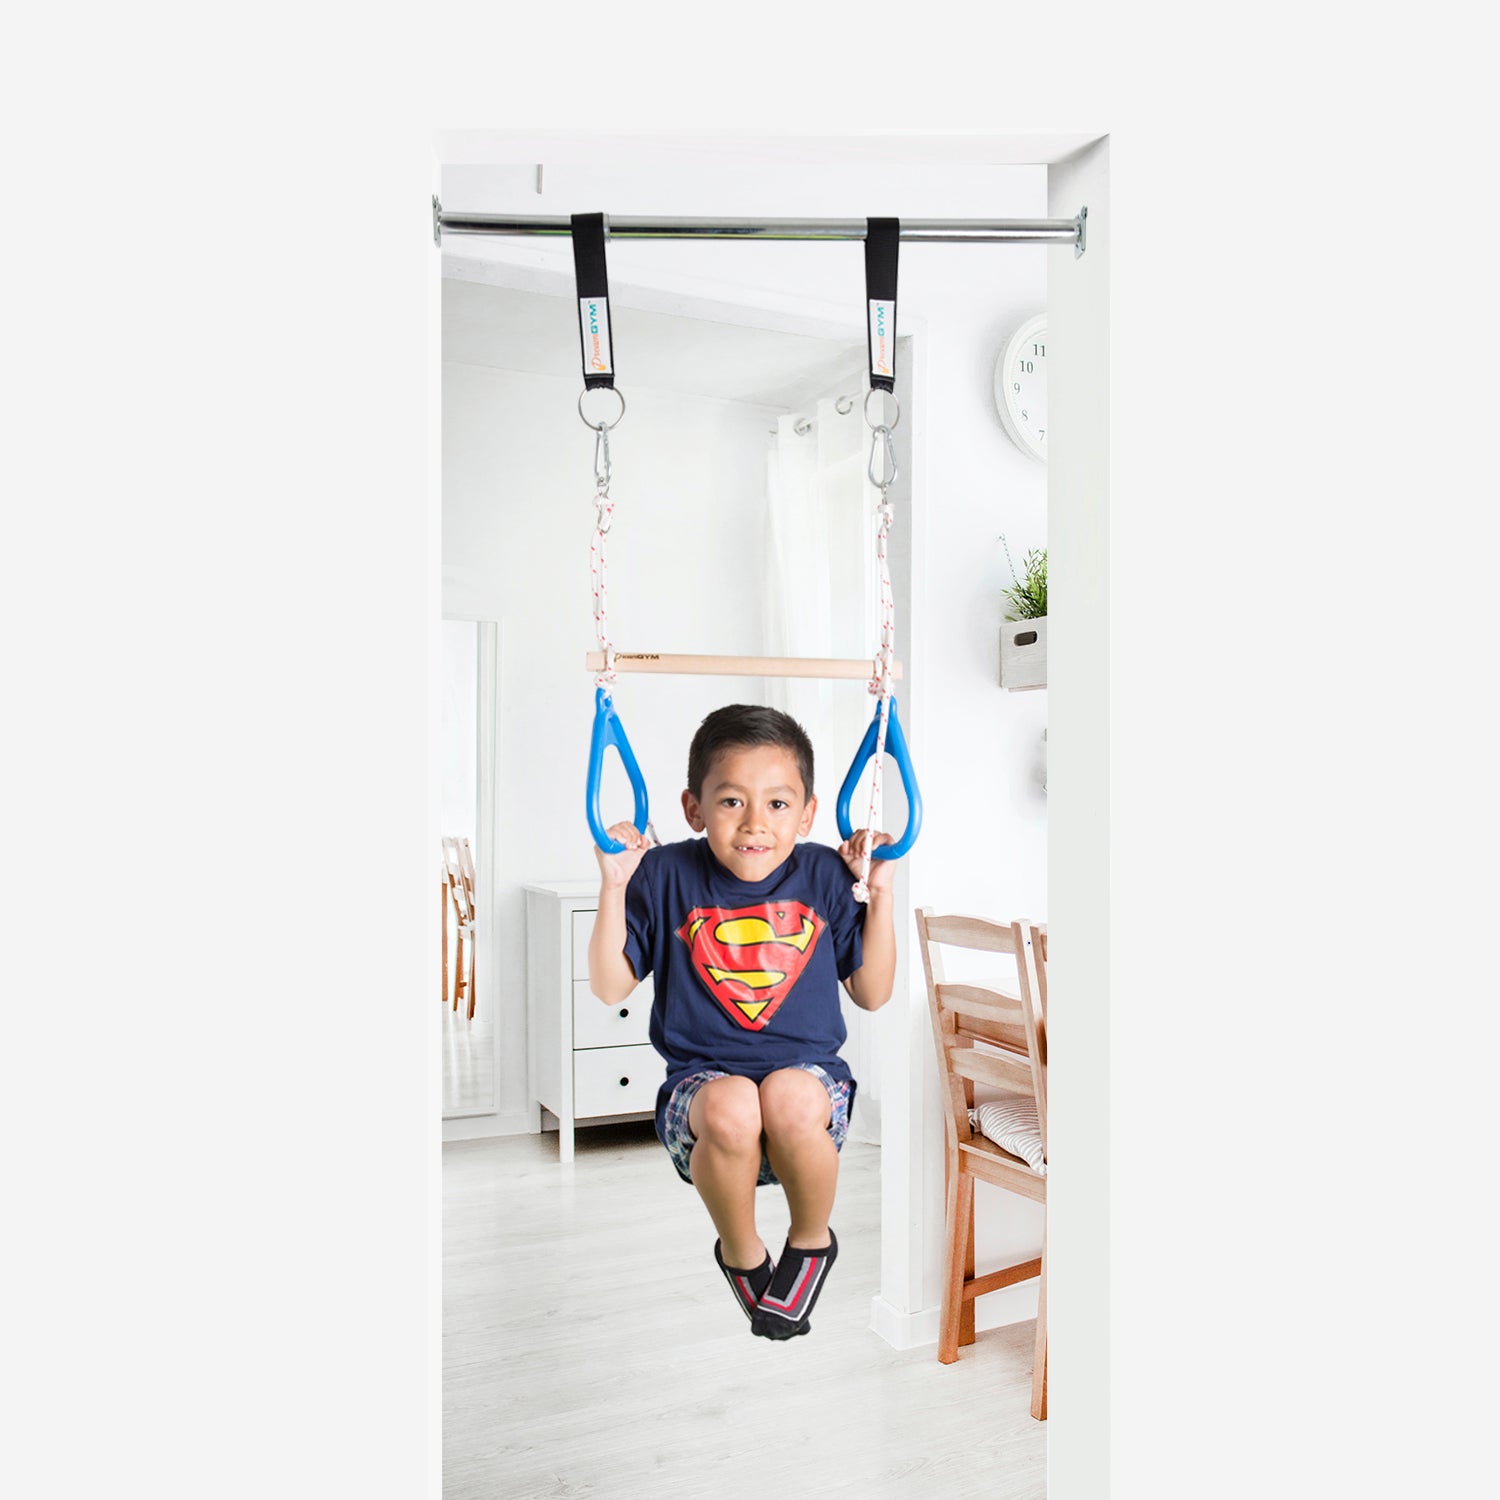 A  boy is playing on doorway gym. He pulled himself up on the trapeze bar and gymnastics rings combo.